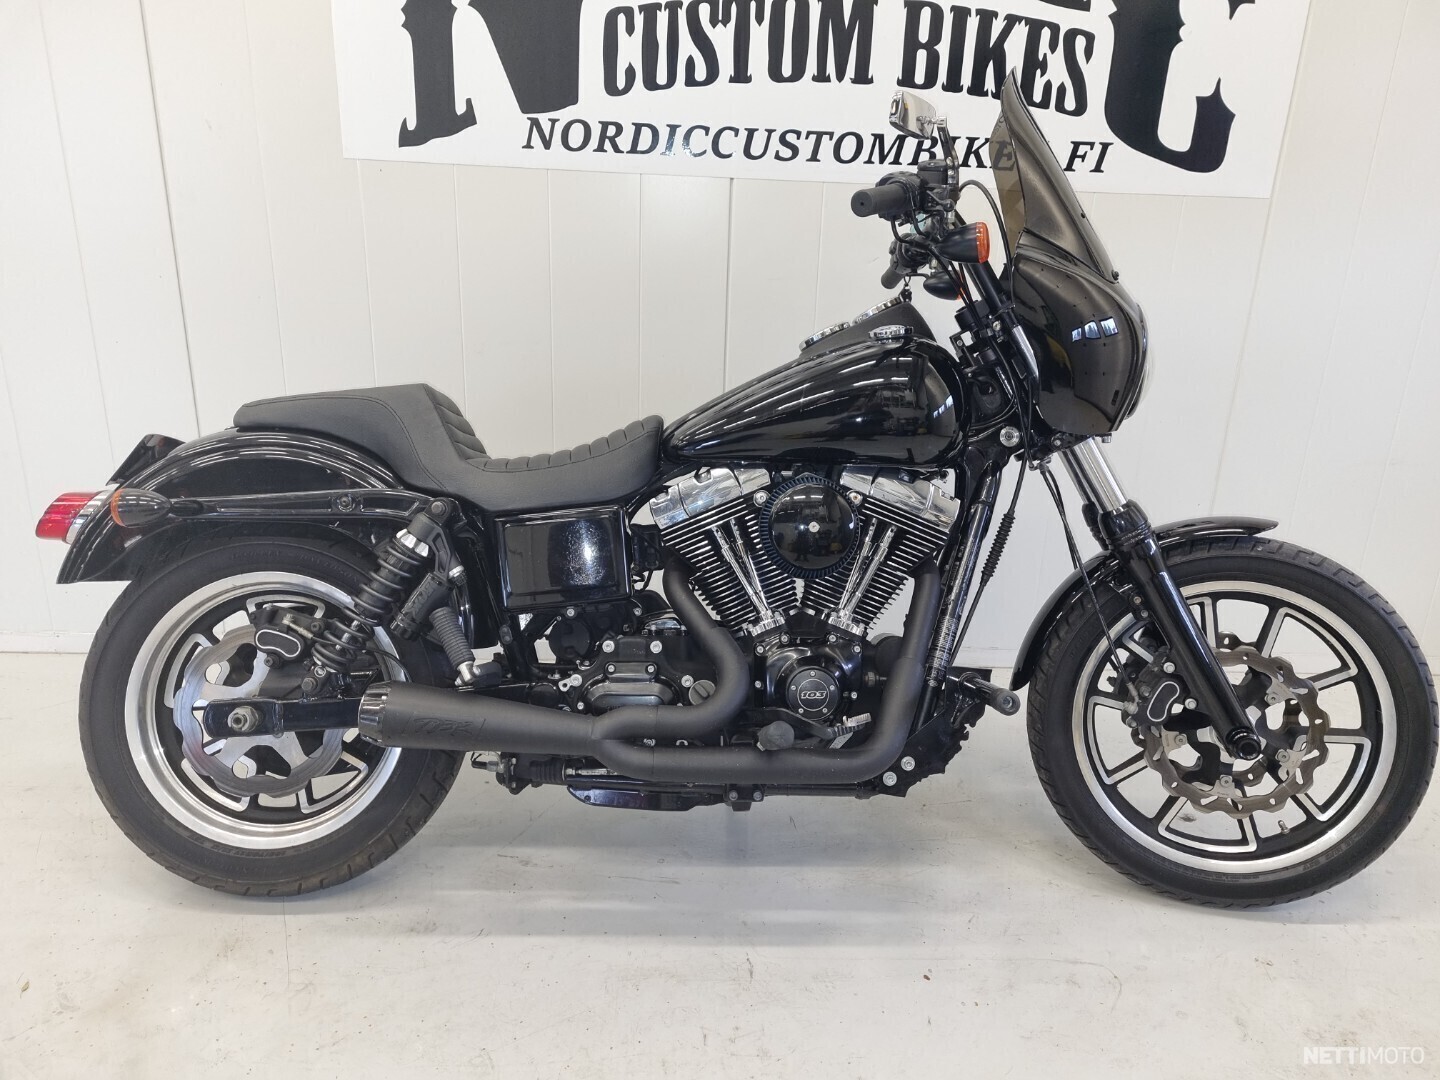 Harley Davidson Dyna Fxdl Dyna Low Rider 1 700 Cm 2015 Tuusula Motorcycle Nettimoto